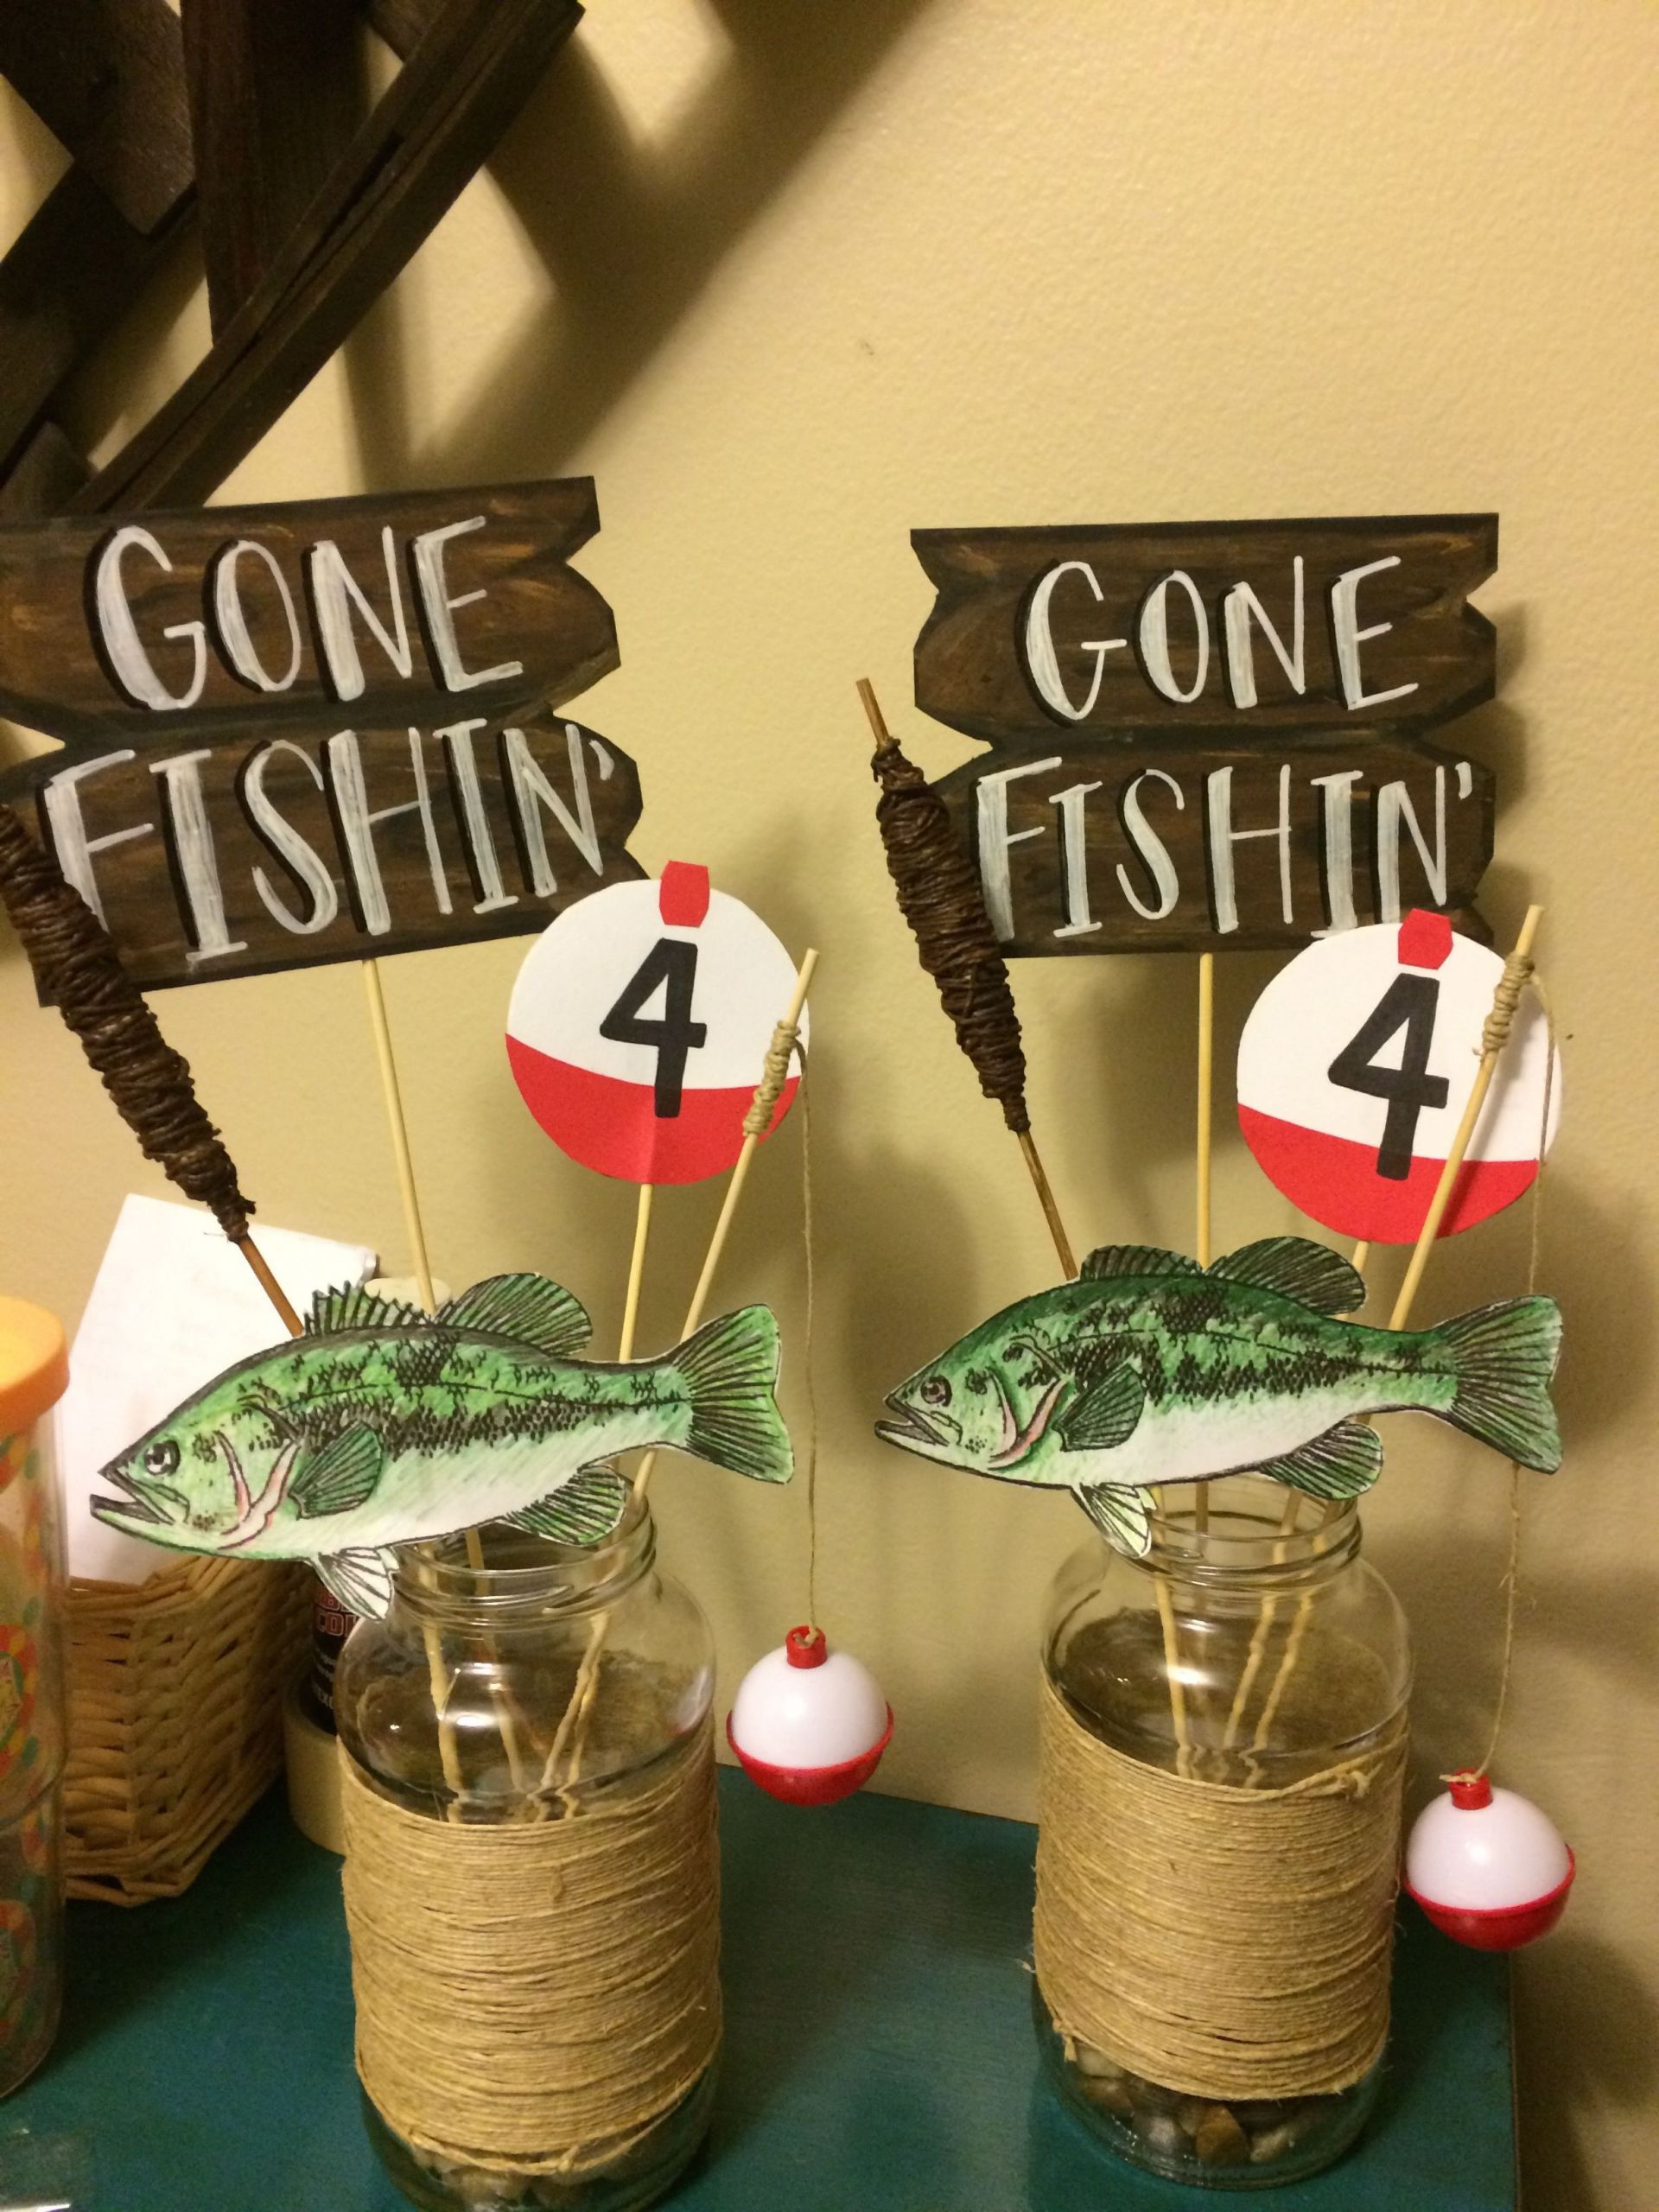 Gone Fishing Retirement Party Ideas
 Little boy Fishing party table centerpieces